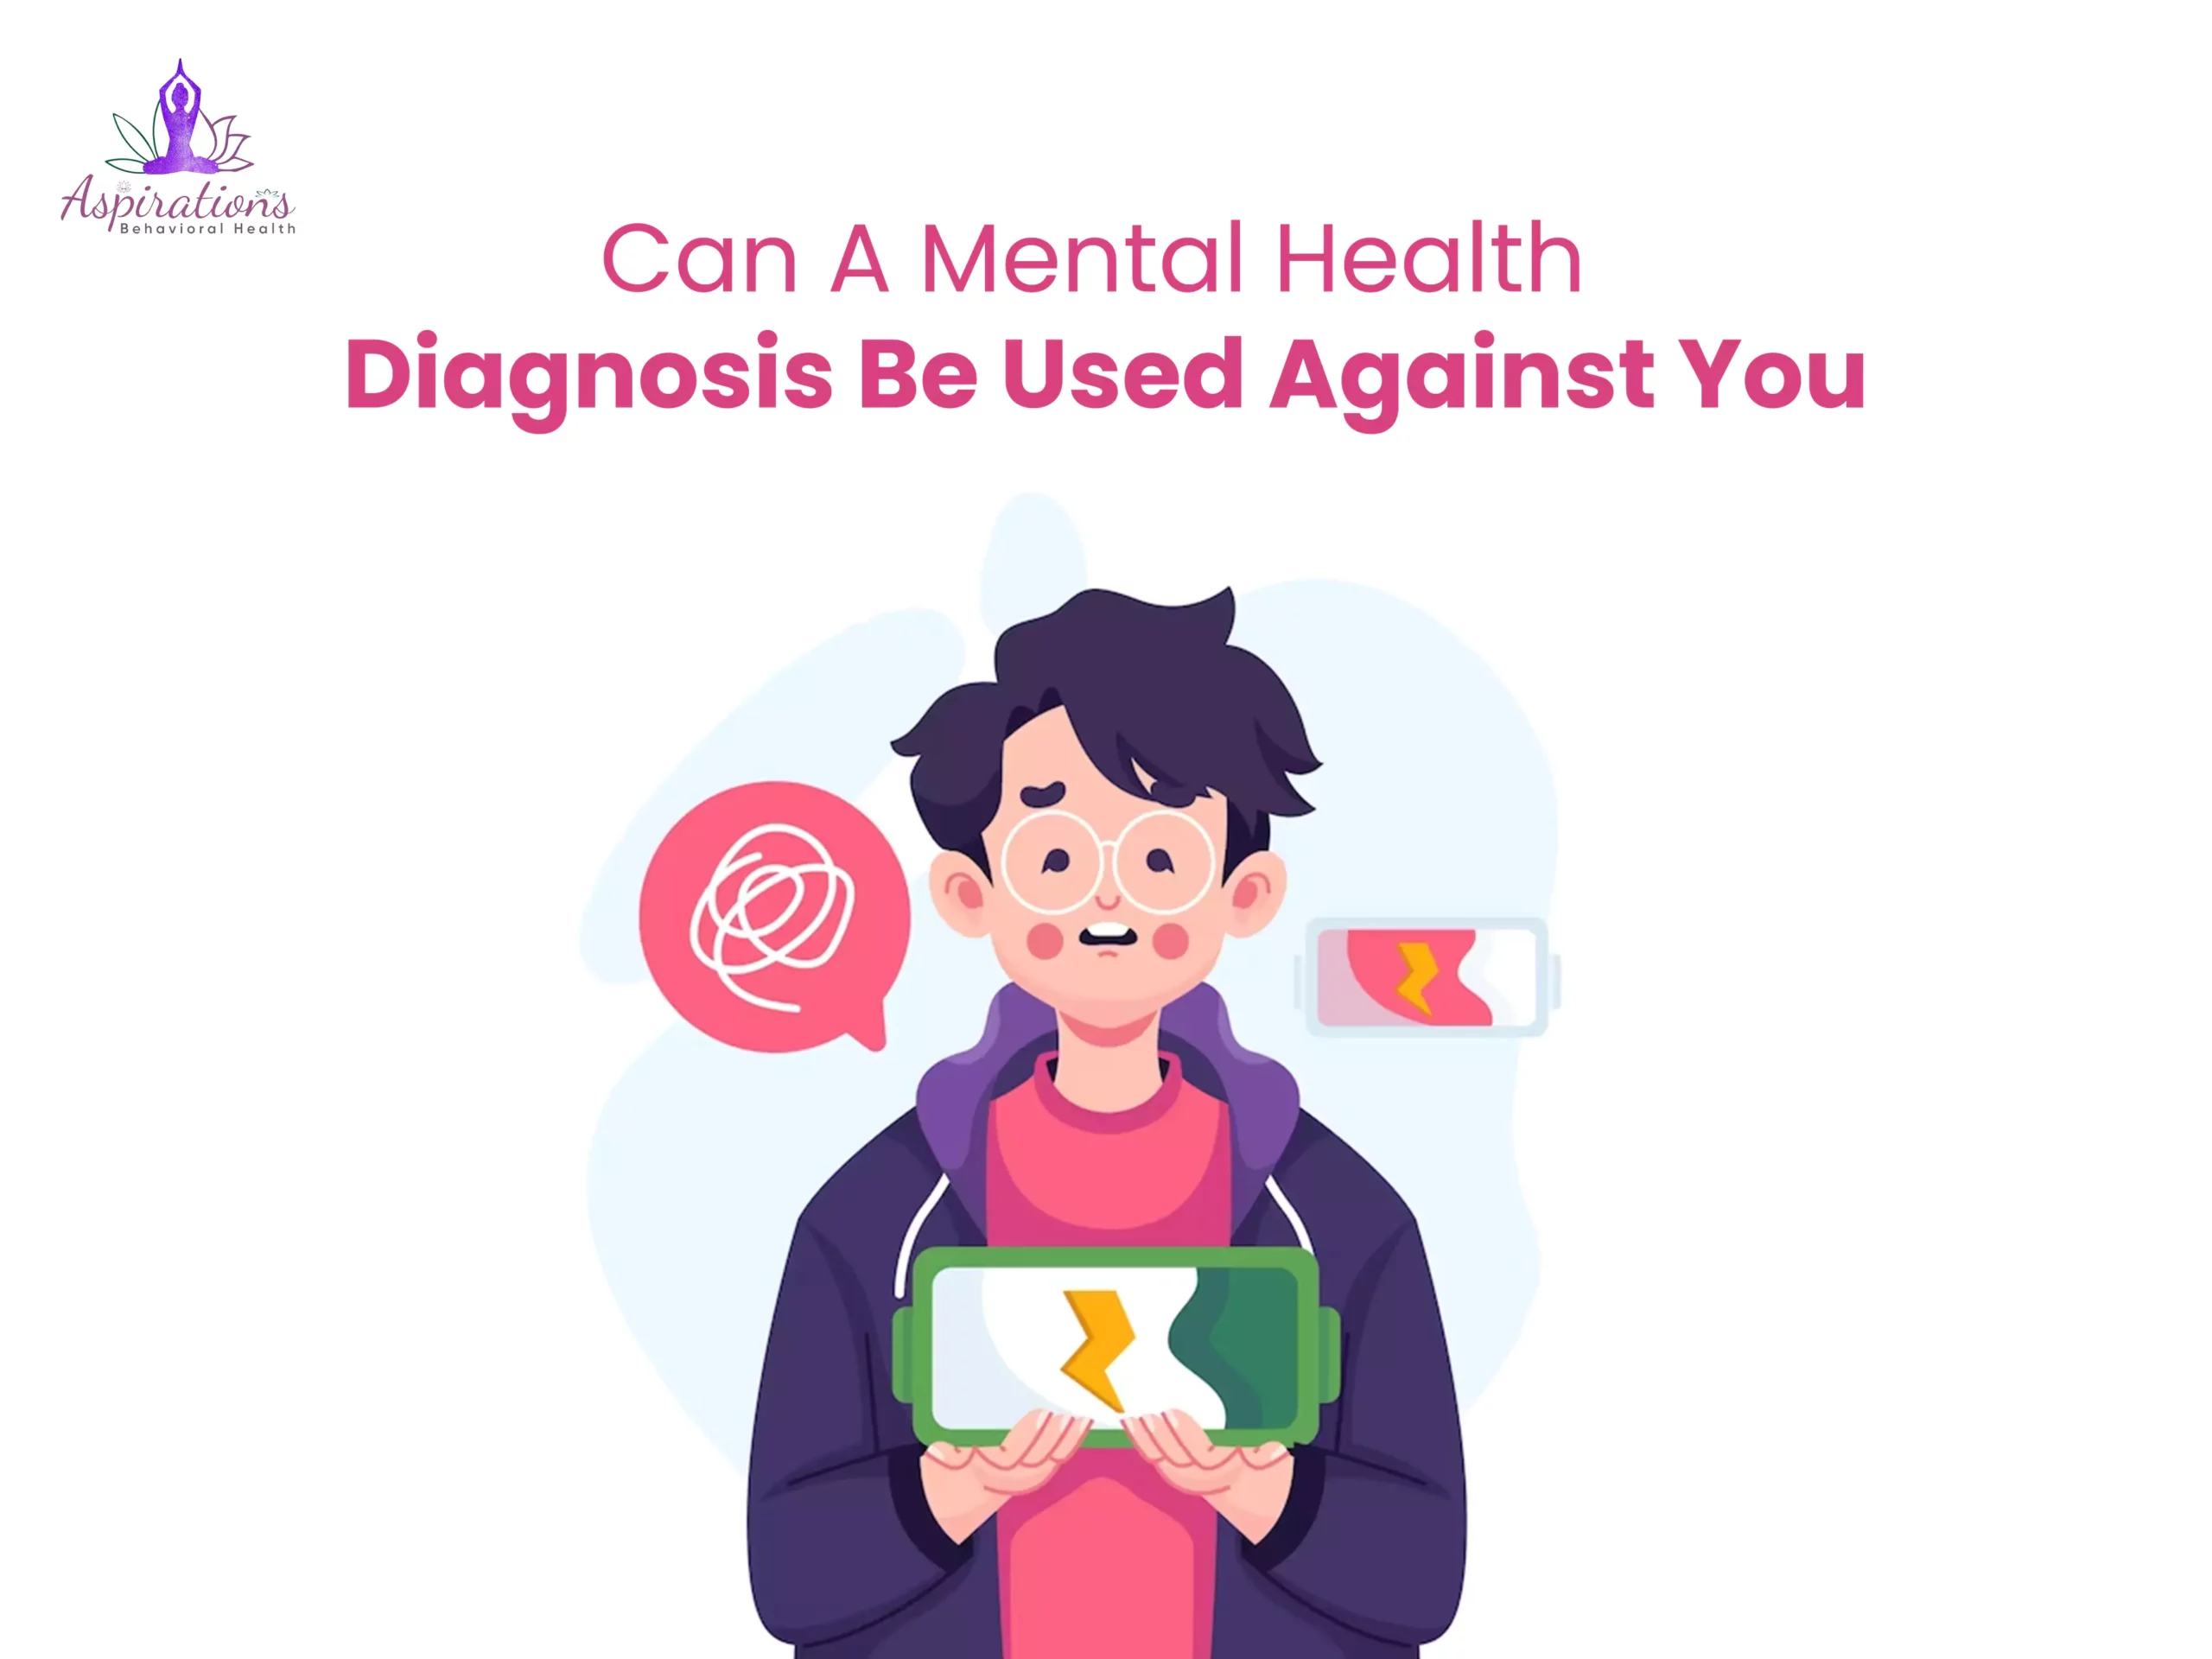 Can A Mental Health Diagnosis Be Used Against You